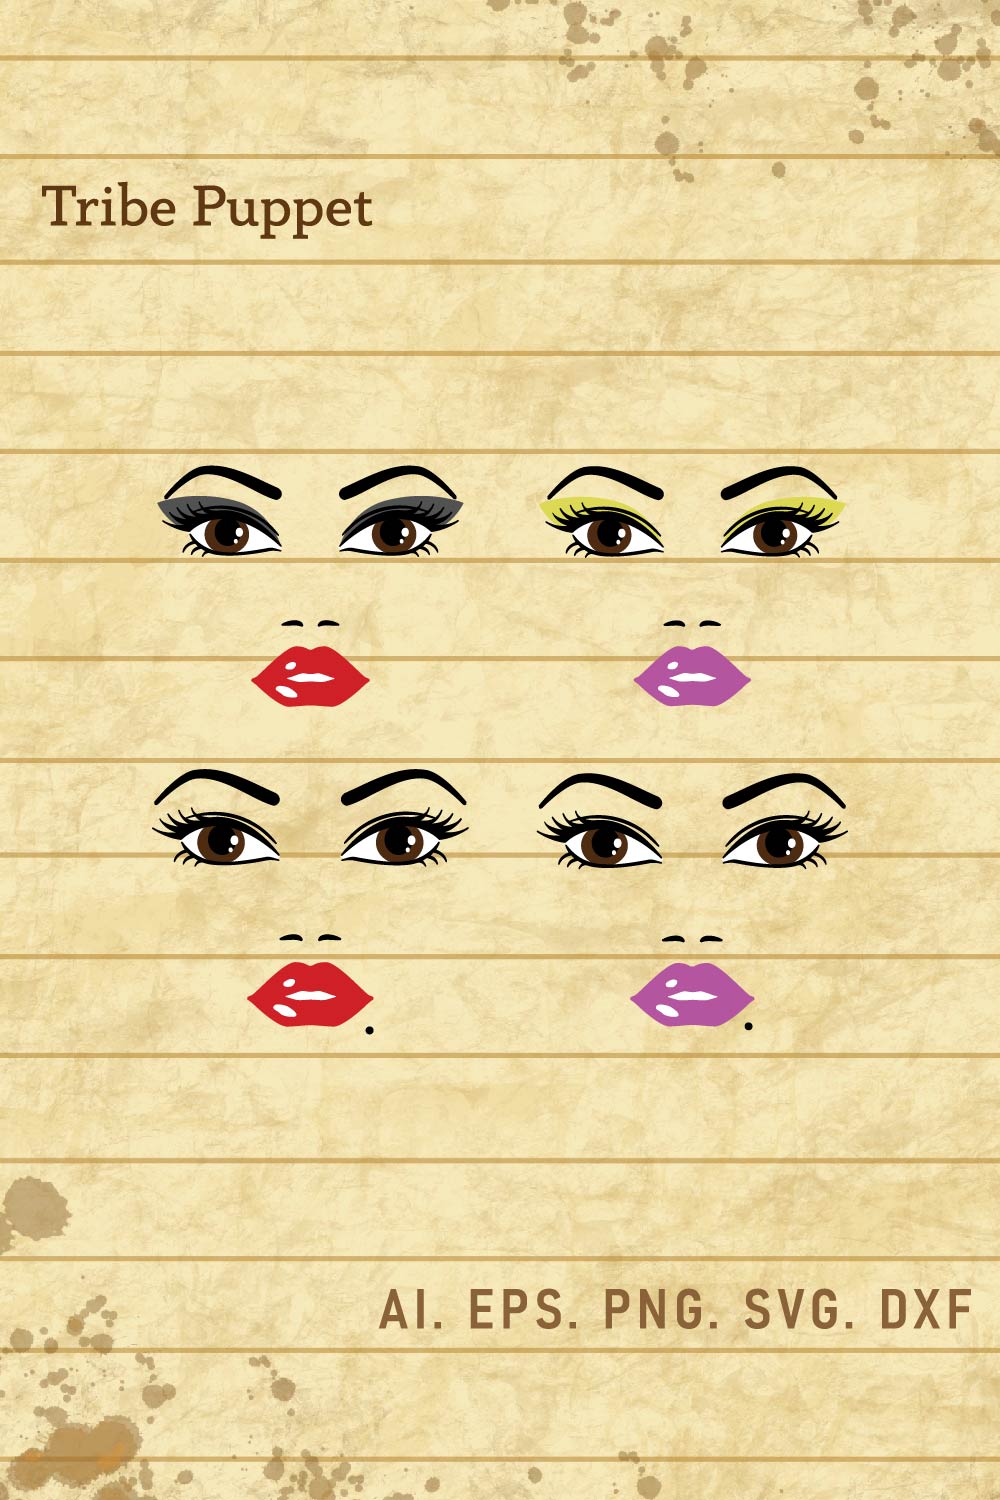 Lips & lashes pinterest preview image.